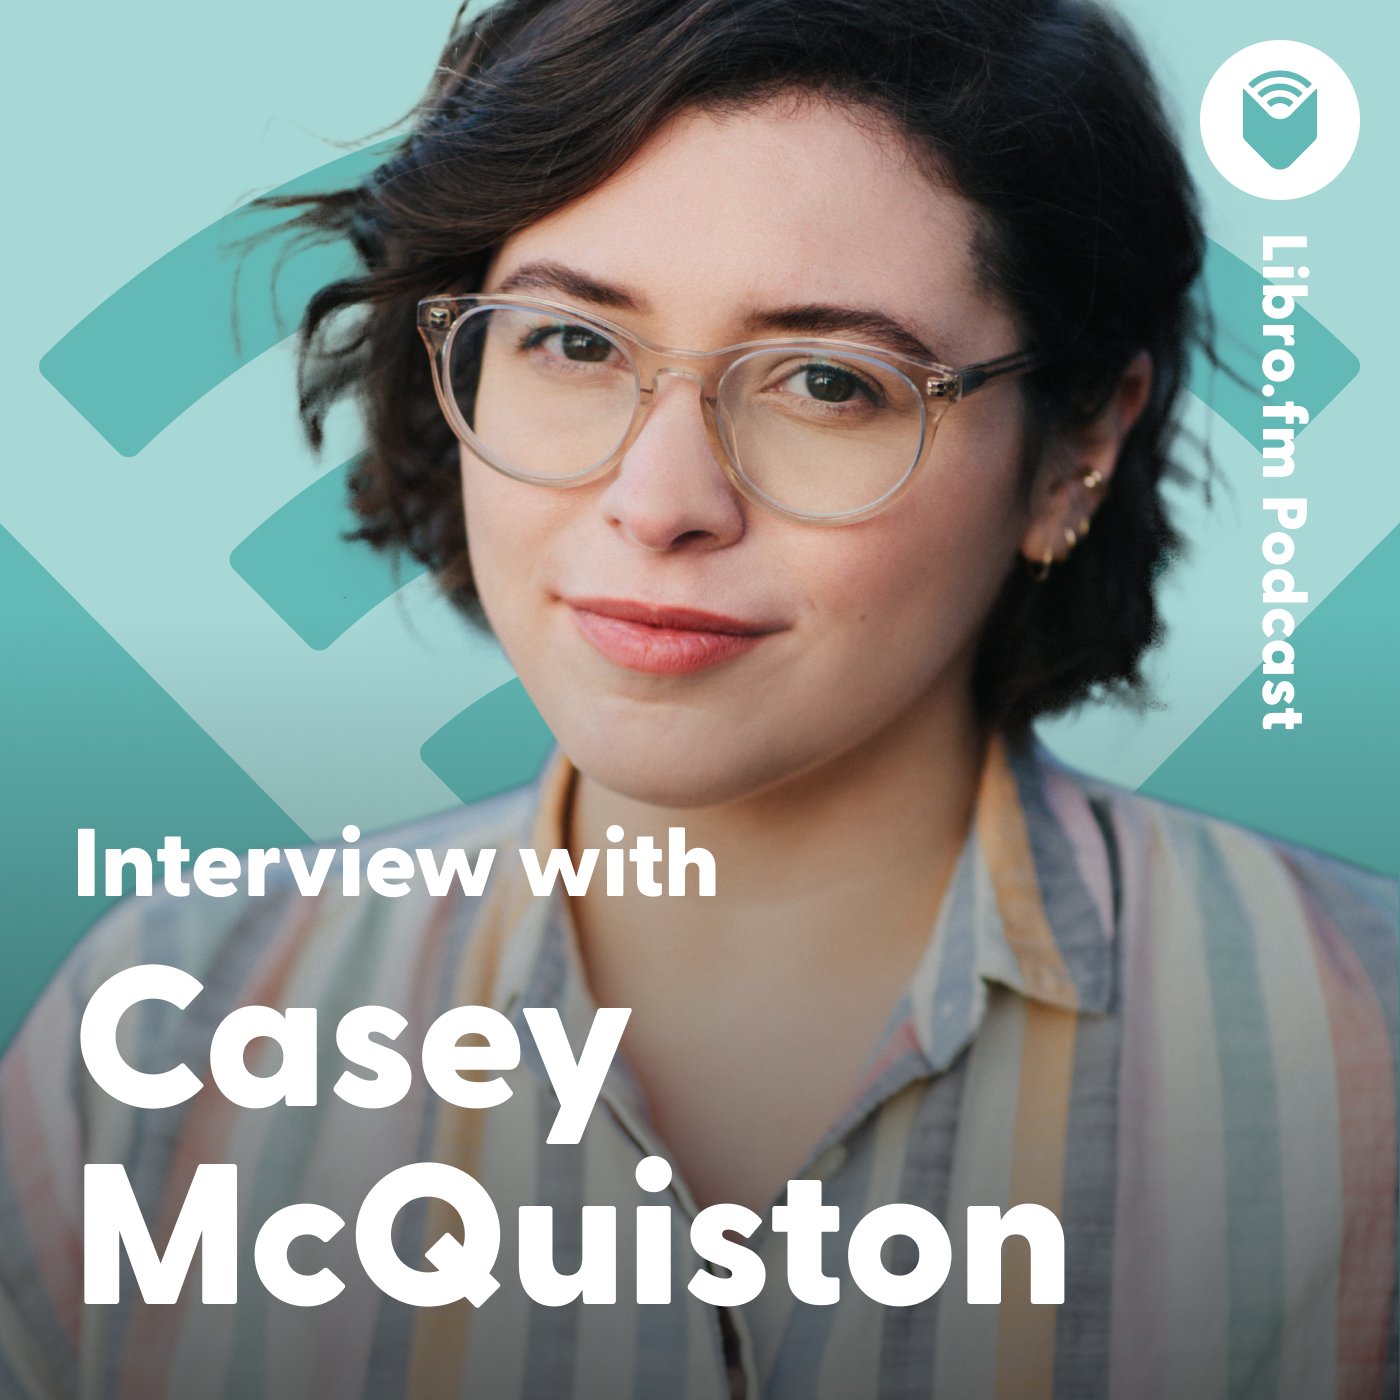 A headshot of Casey McQuiston on a teal background showing the Libro.fm logo. Text reads: “Libro.fm Podcast: Interview with Casey McQuiston.